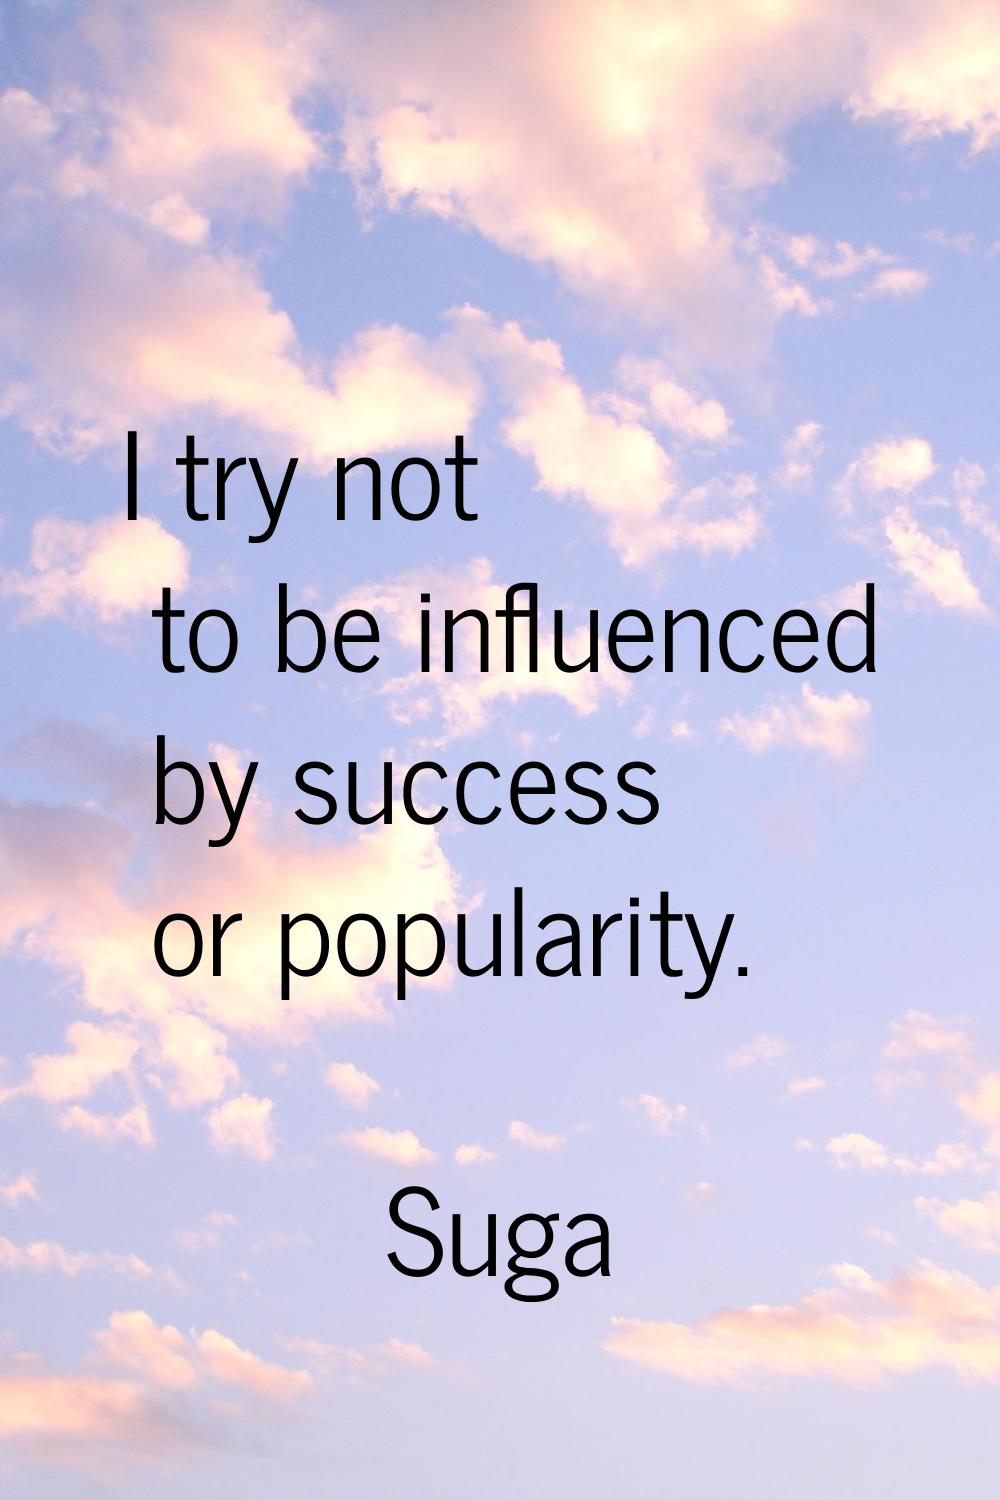 I try not to be influenced by success or popularity.